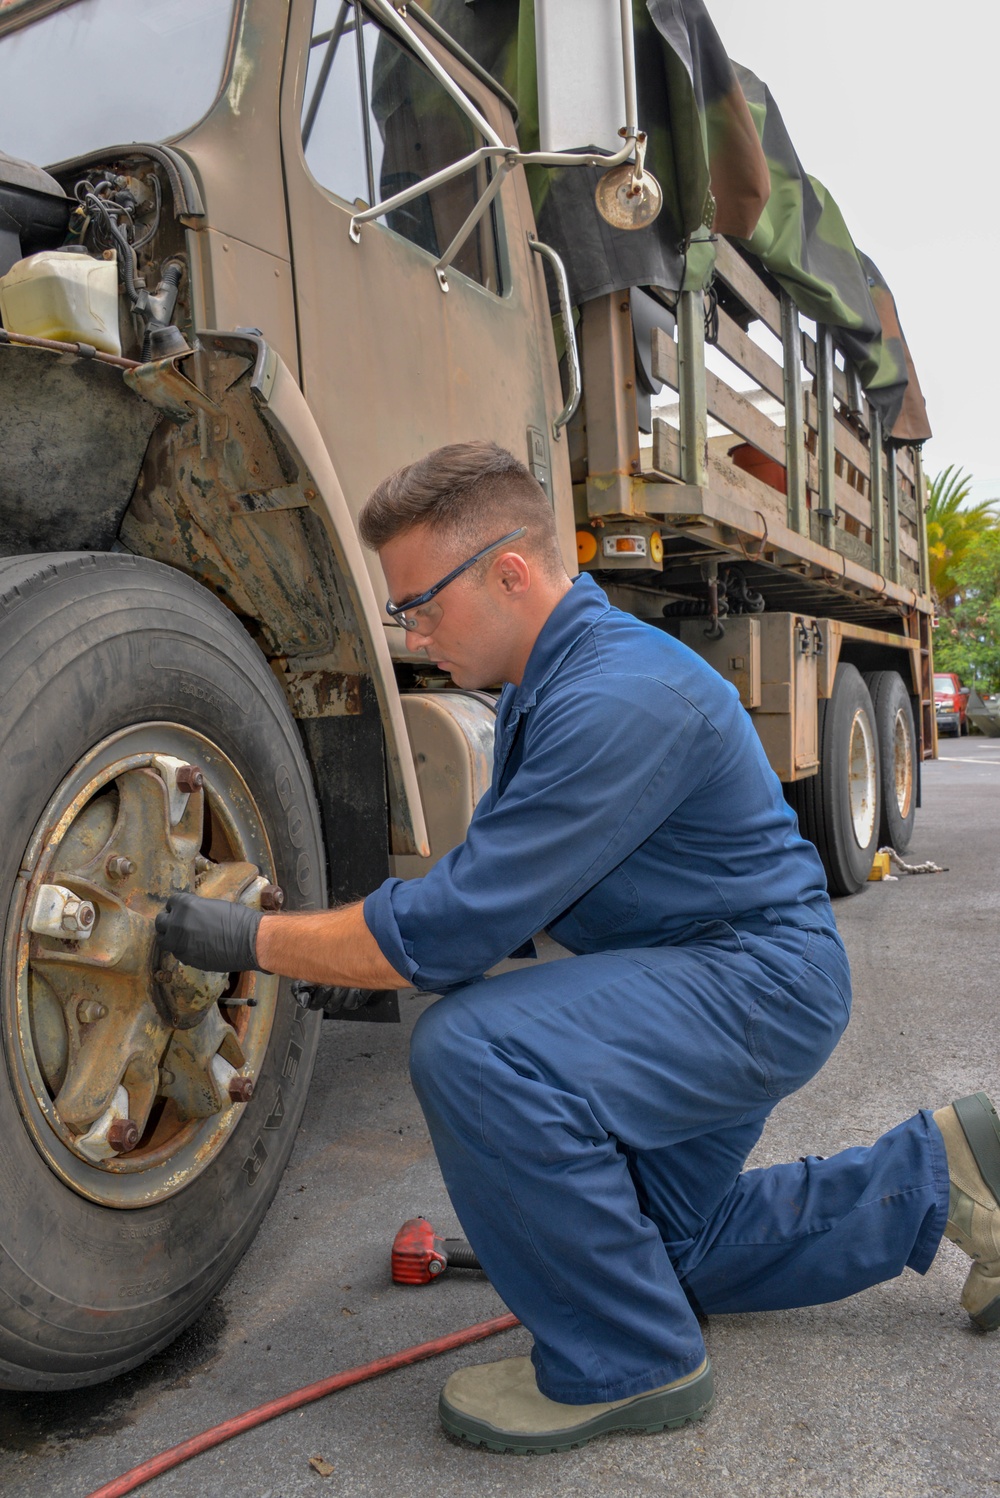 134th Vehicle Operations Airmen work with 154th Airmen